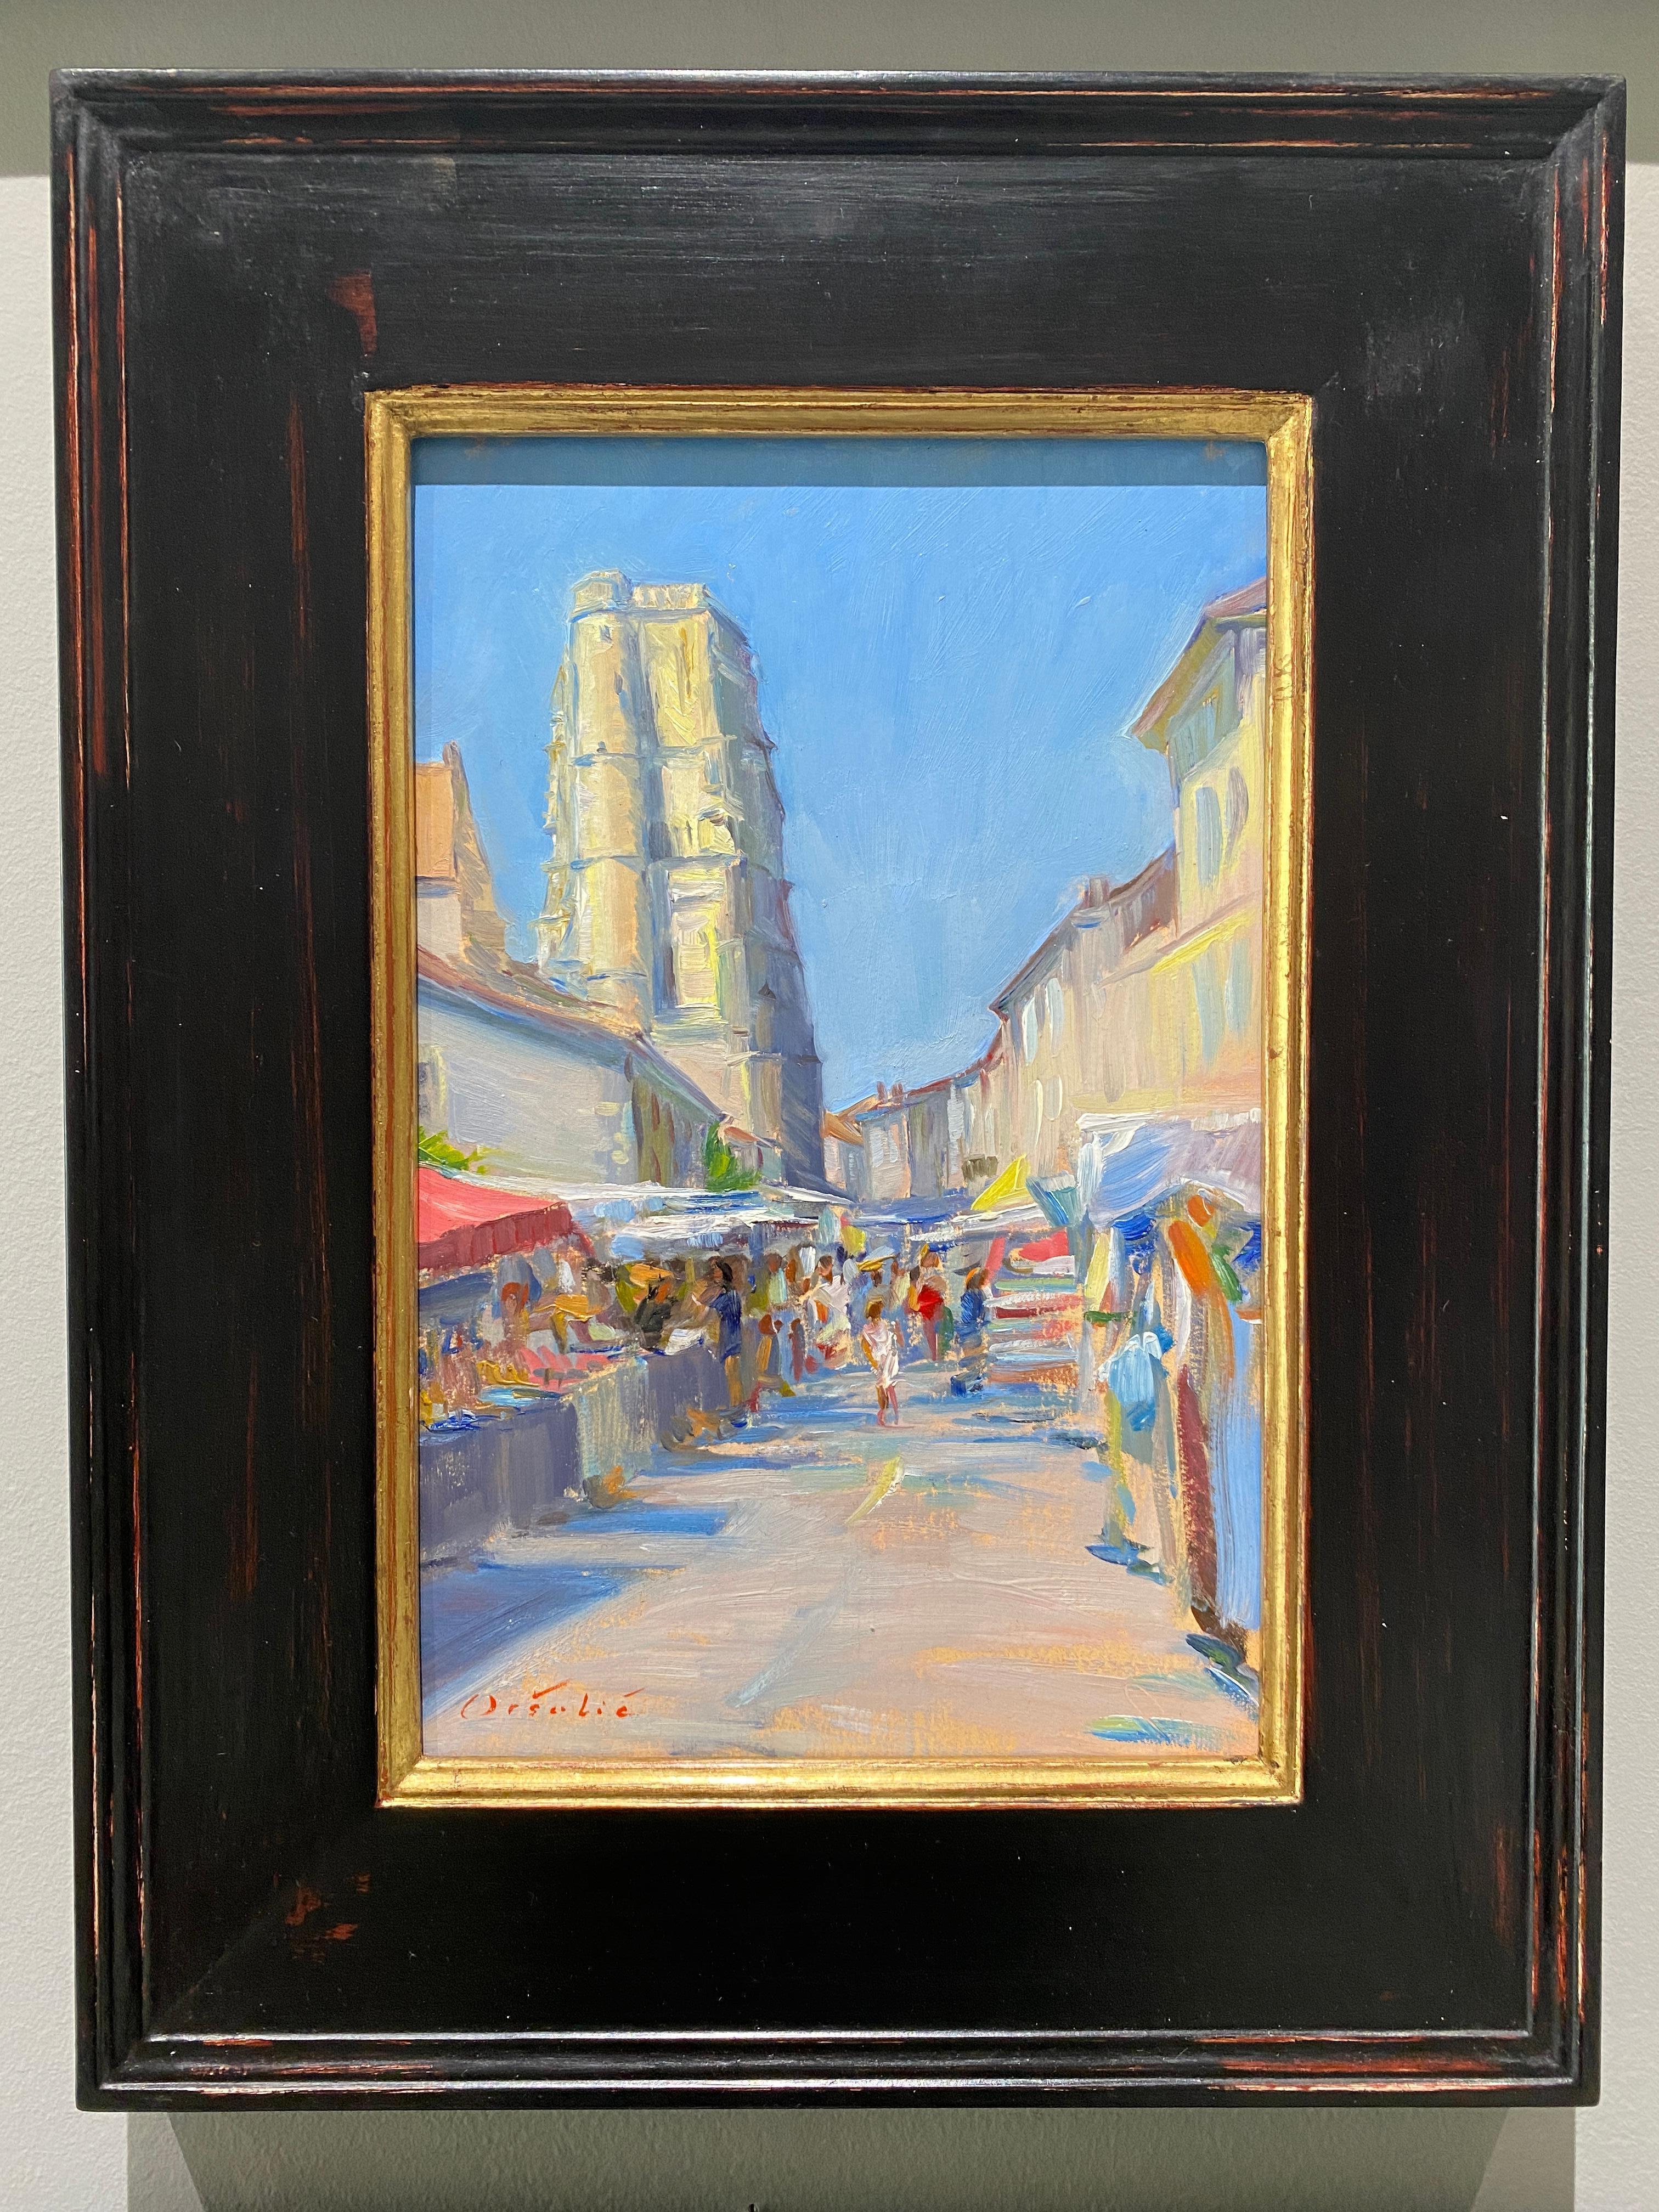 Lectoure Market - Painting by Tina Orsolic Dalessio